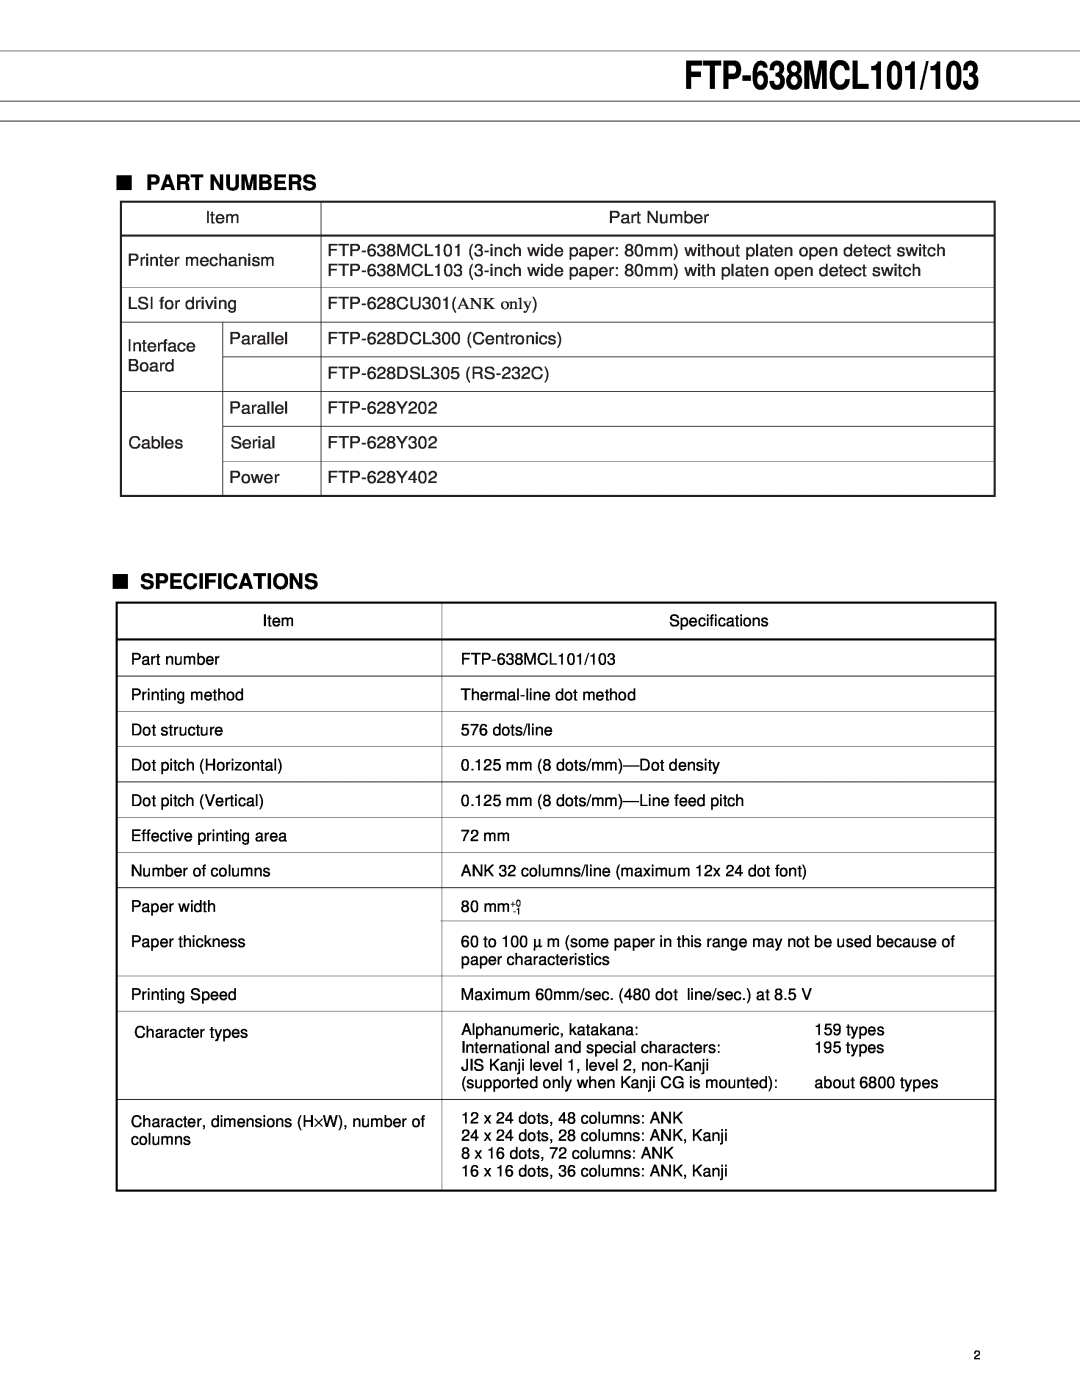 Fujitsu FTP-638MCL103 manual FTP-638MCL101/103, Part Numbers, Specifications 